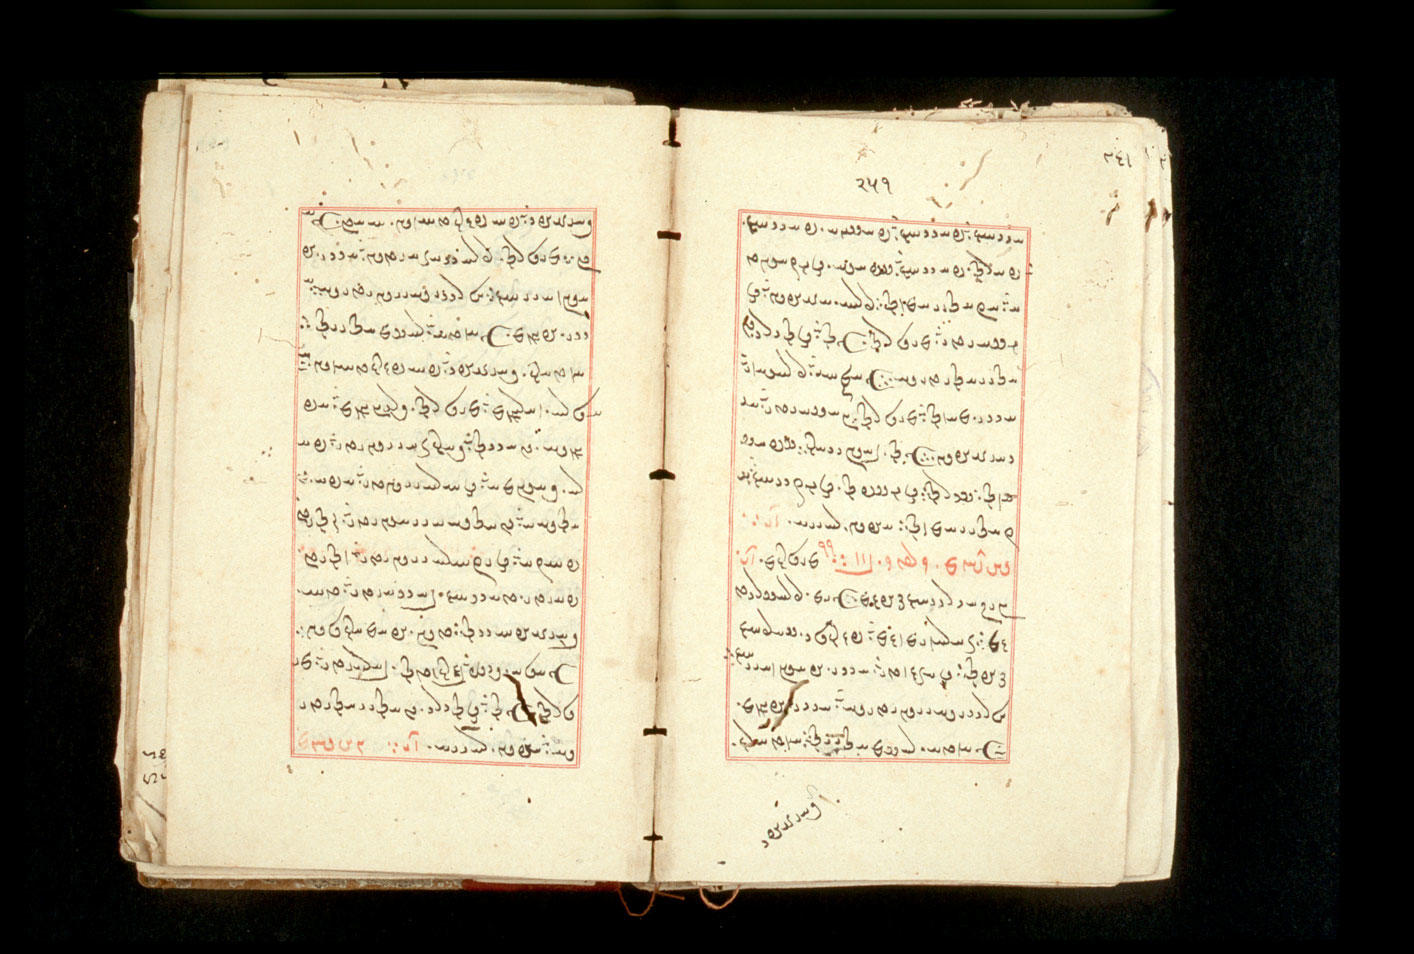 Folios 251v (right) and 252r (left)